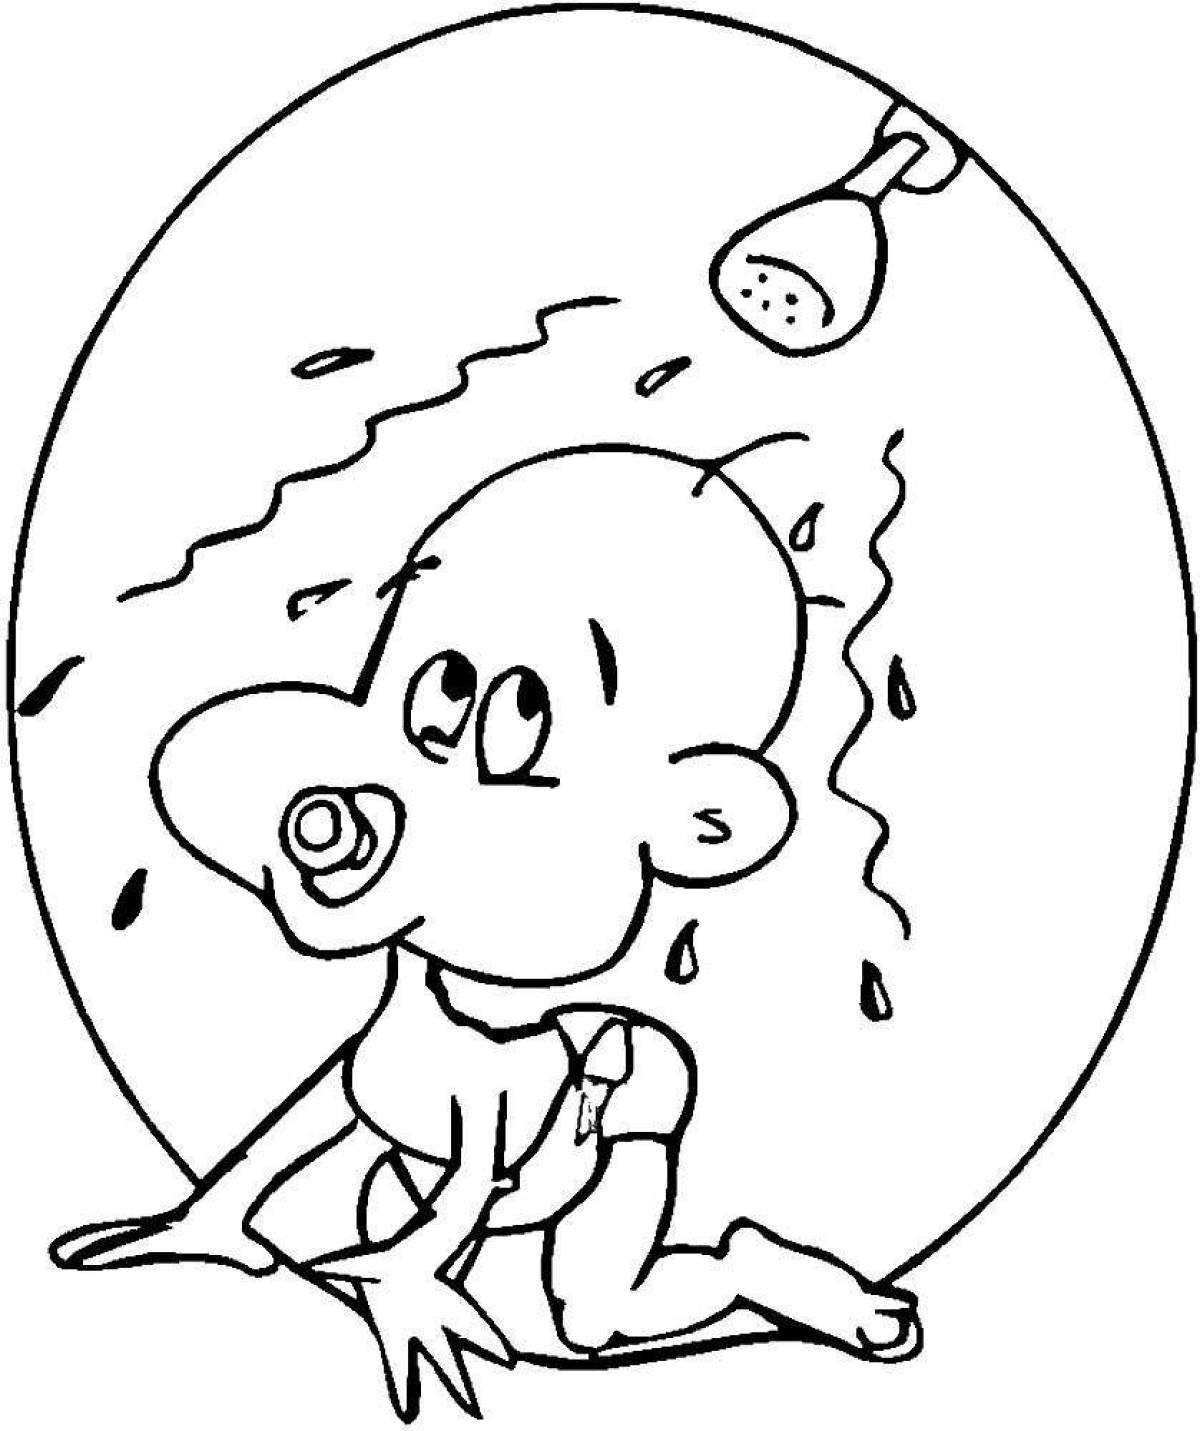 Vivacious coloring page baby in yellow